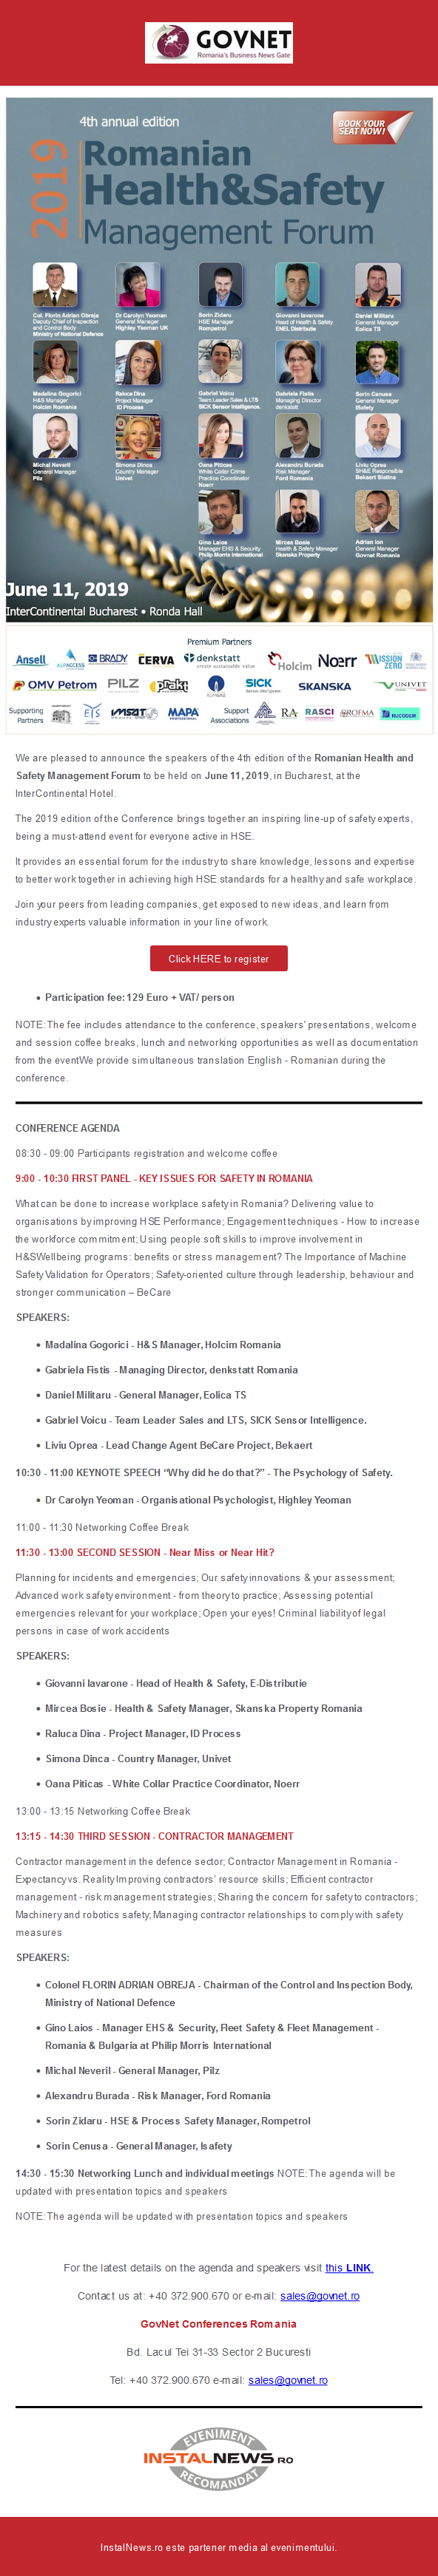 SAVE THE DATE! Romanian Health & Safety Management Forum - June 11, 2019 Bucharest